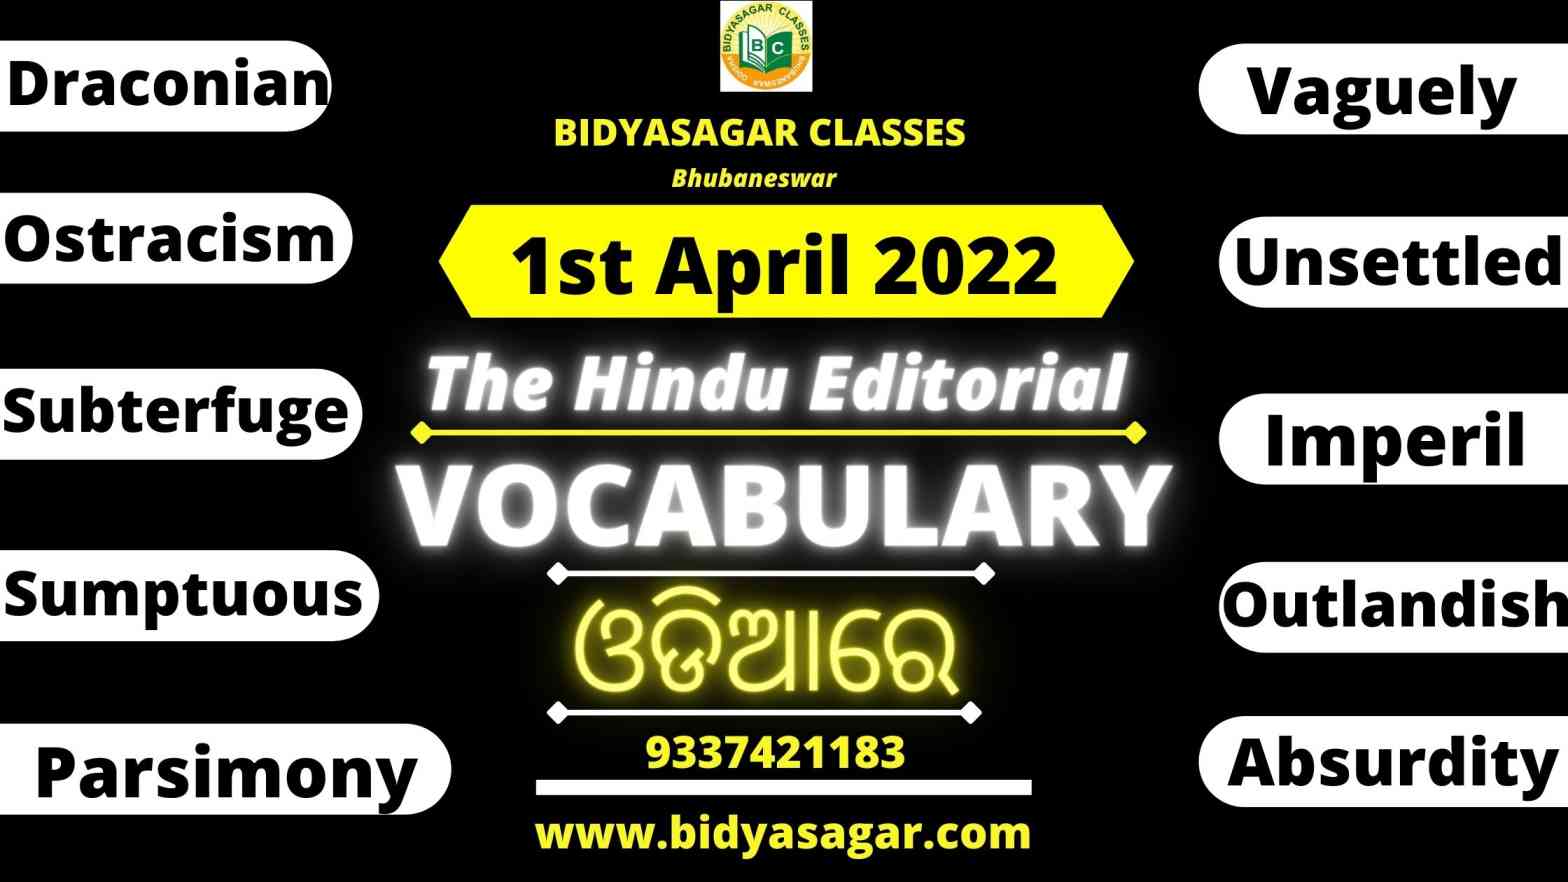 The Hindu Editorial Vocabulary of 1st April 2022